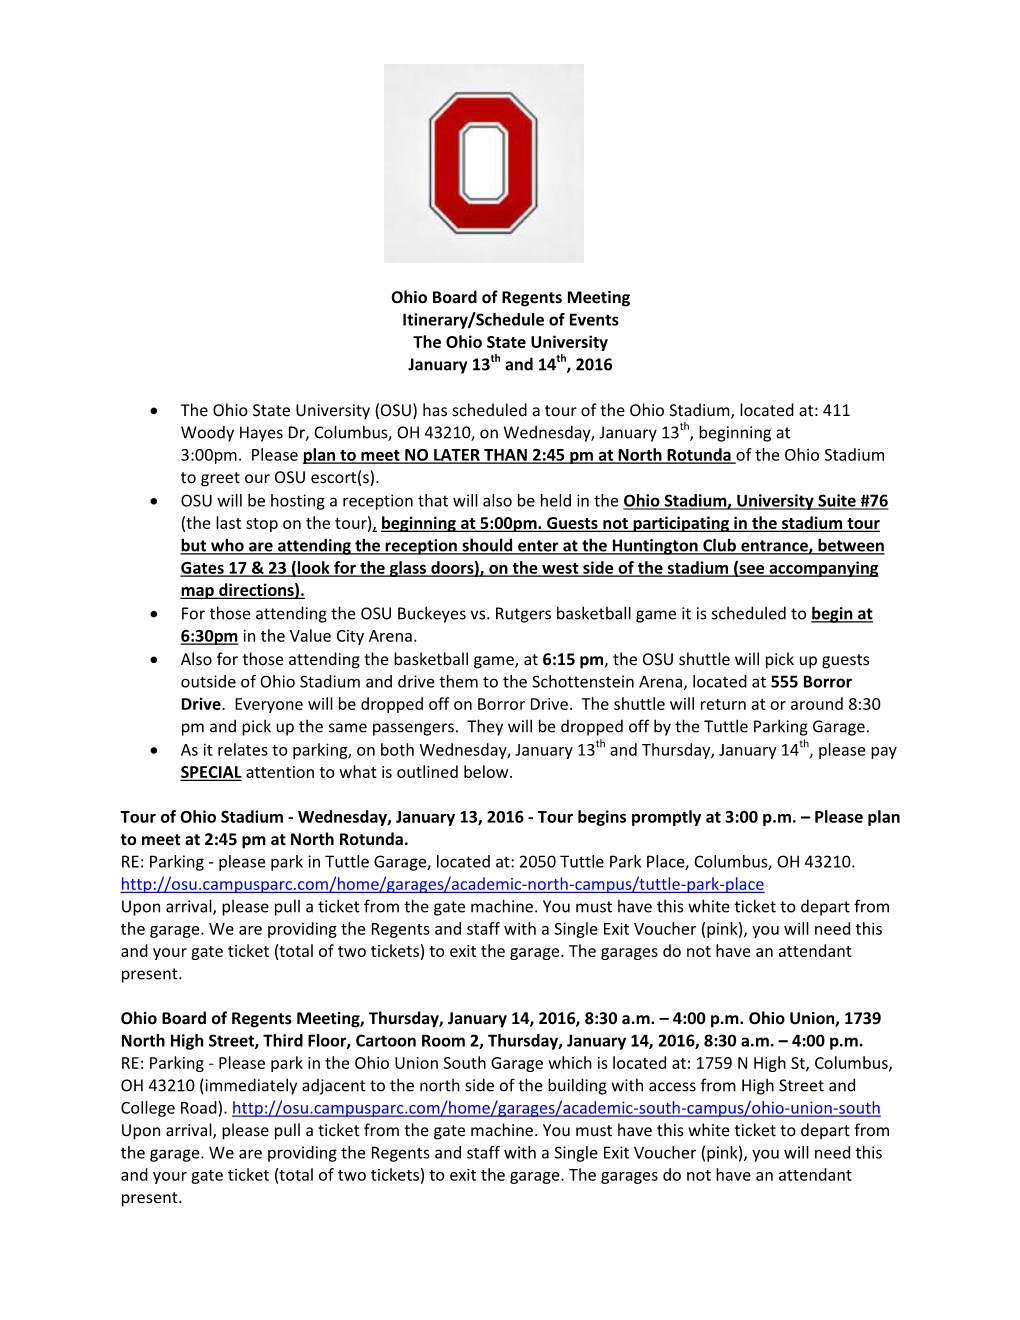 Ohio Board of Regents Meeting Itinerary/Schedule of Events the Ohio State University January 13Th and 14Th, 2016